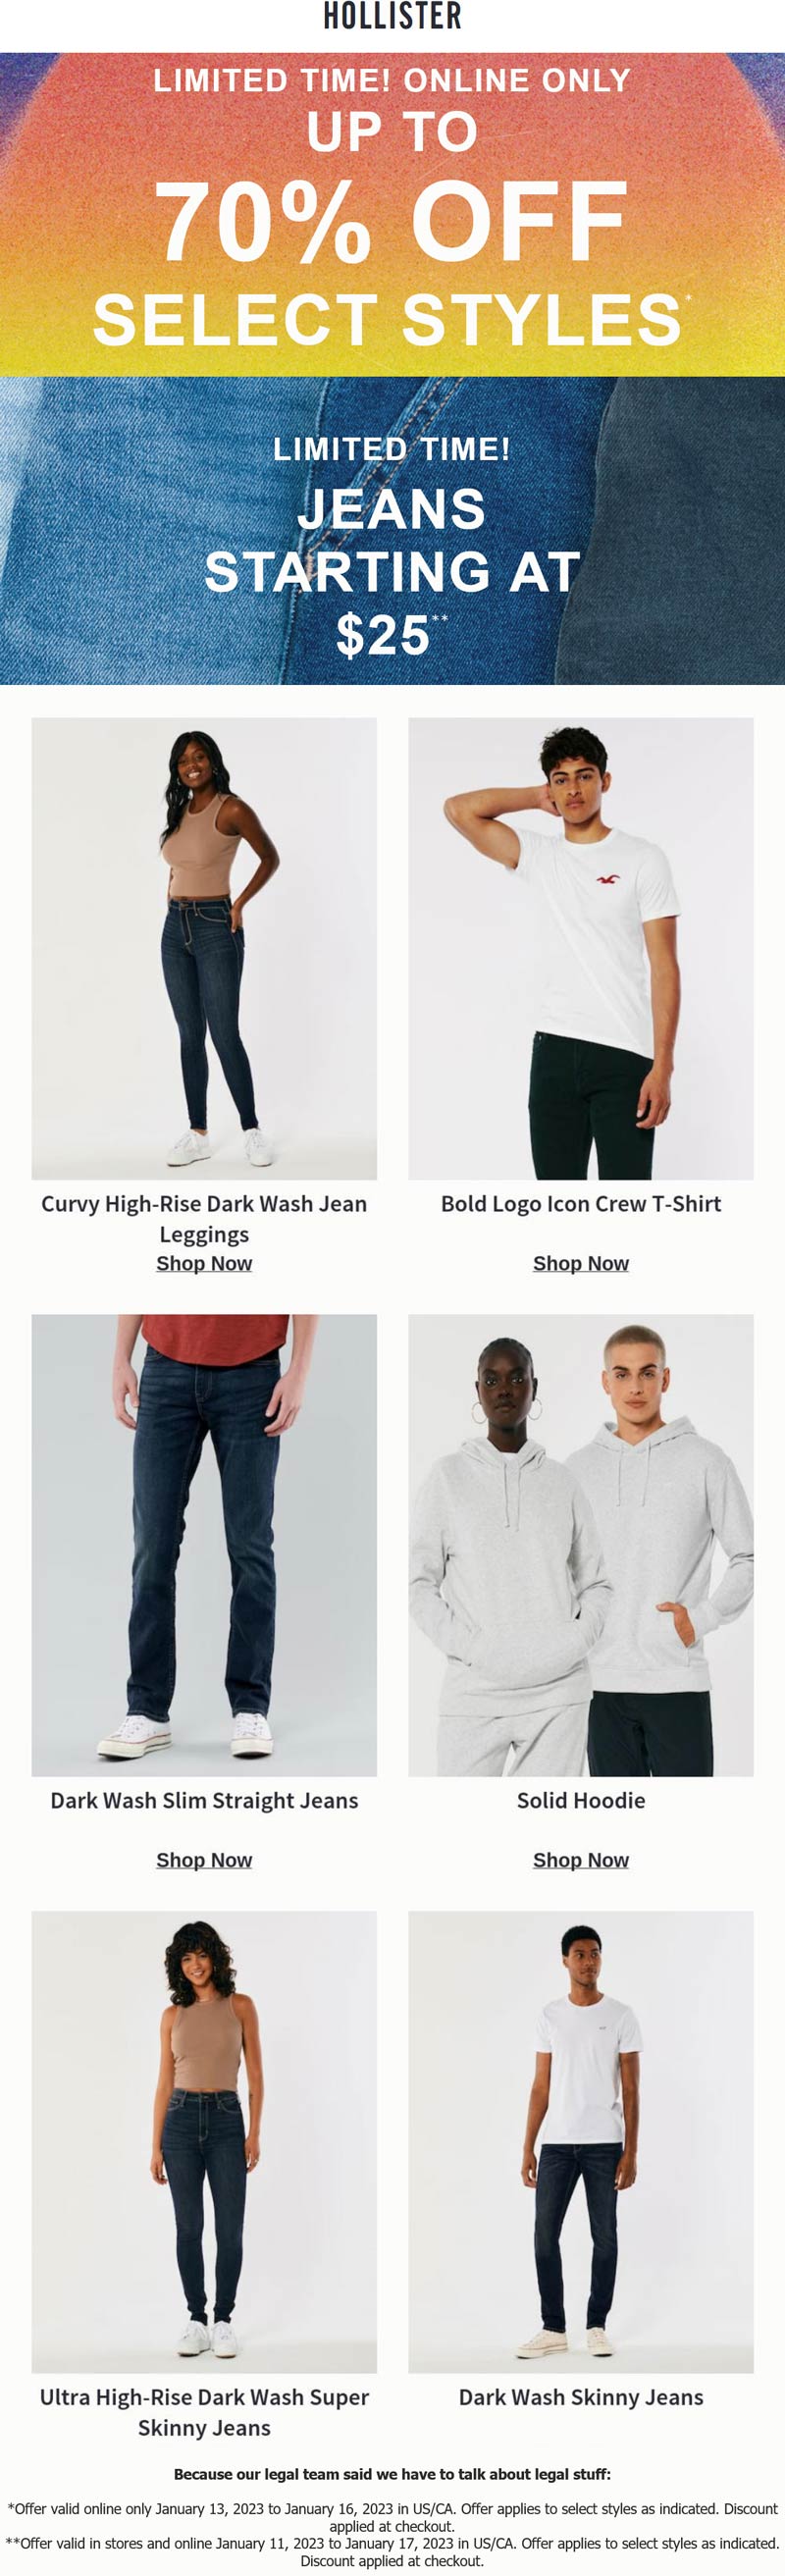 Hollister stores Coupon  $25 jeans & more online at Hollister #hollister 